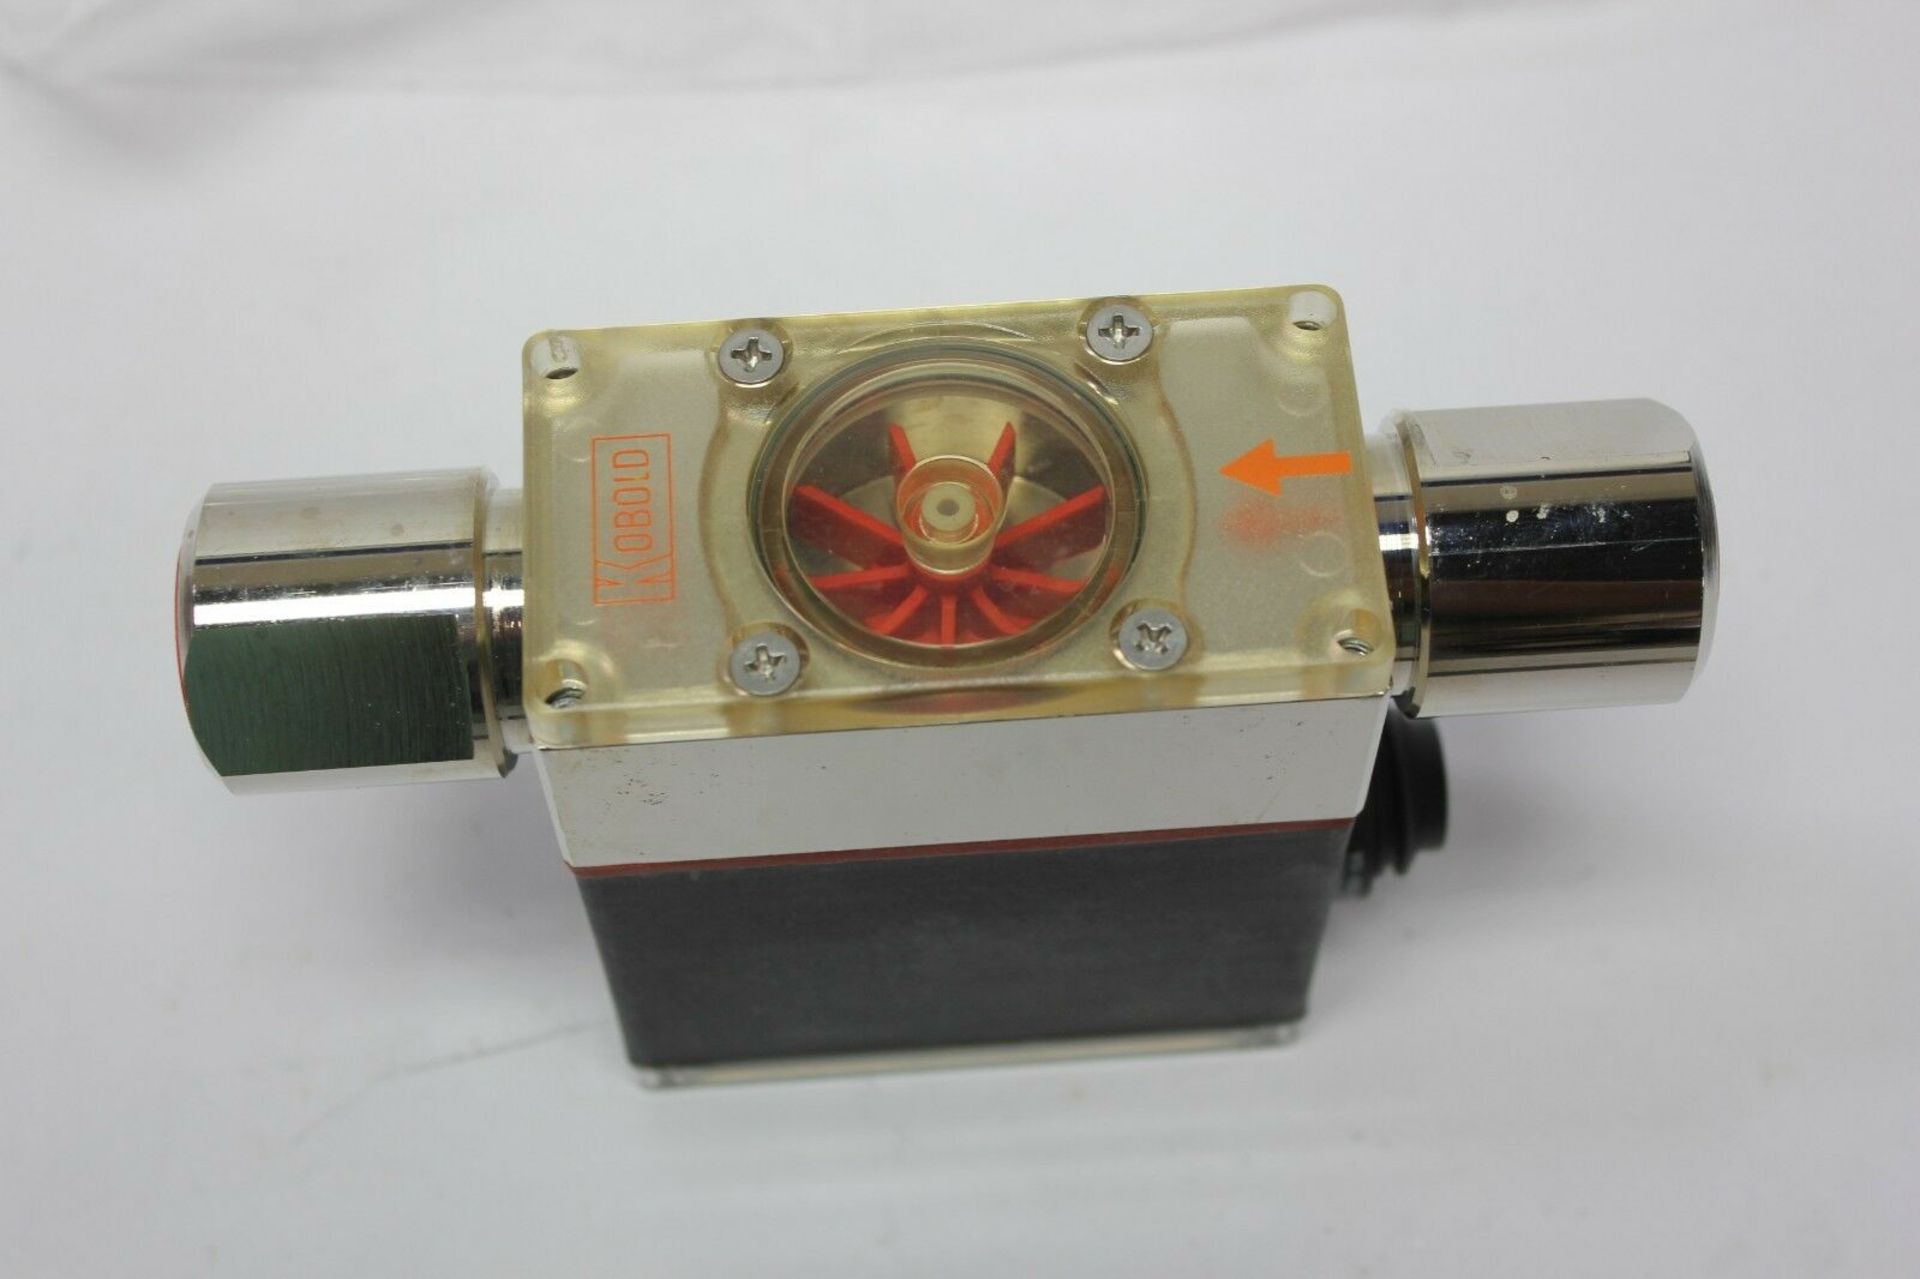 New Kobold Stainless Steel DF-WM Paddle Wheel Flow Switch - Image 5 of 5